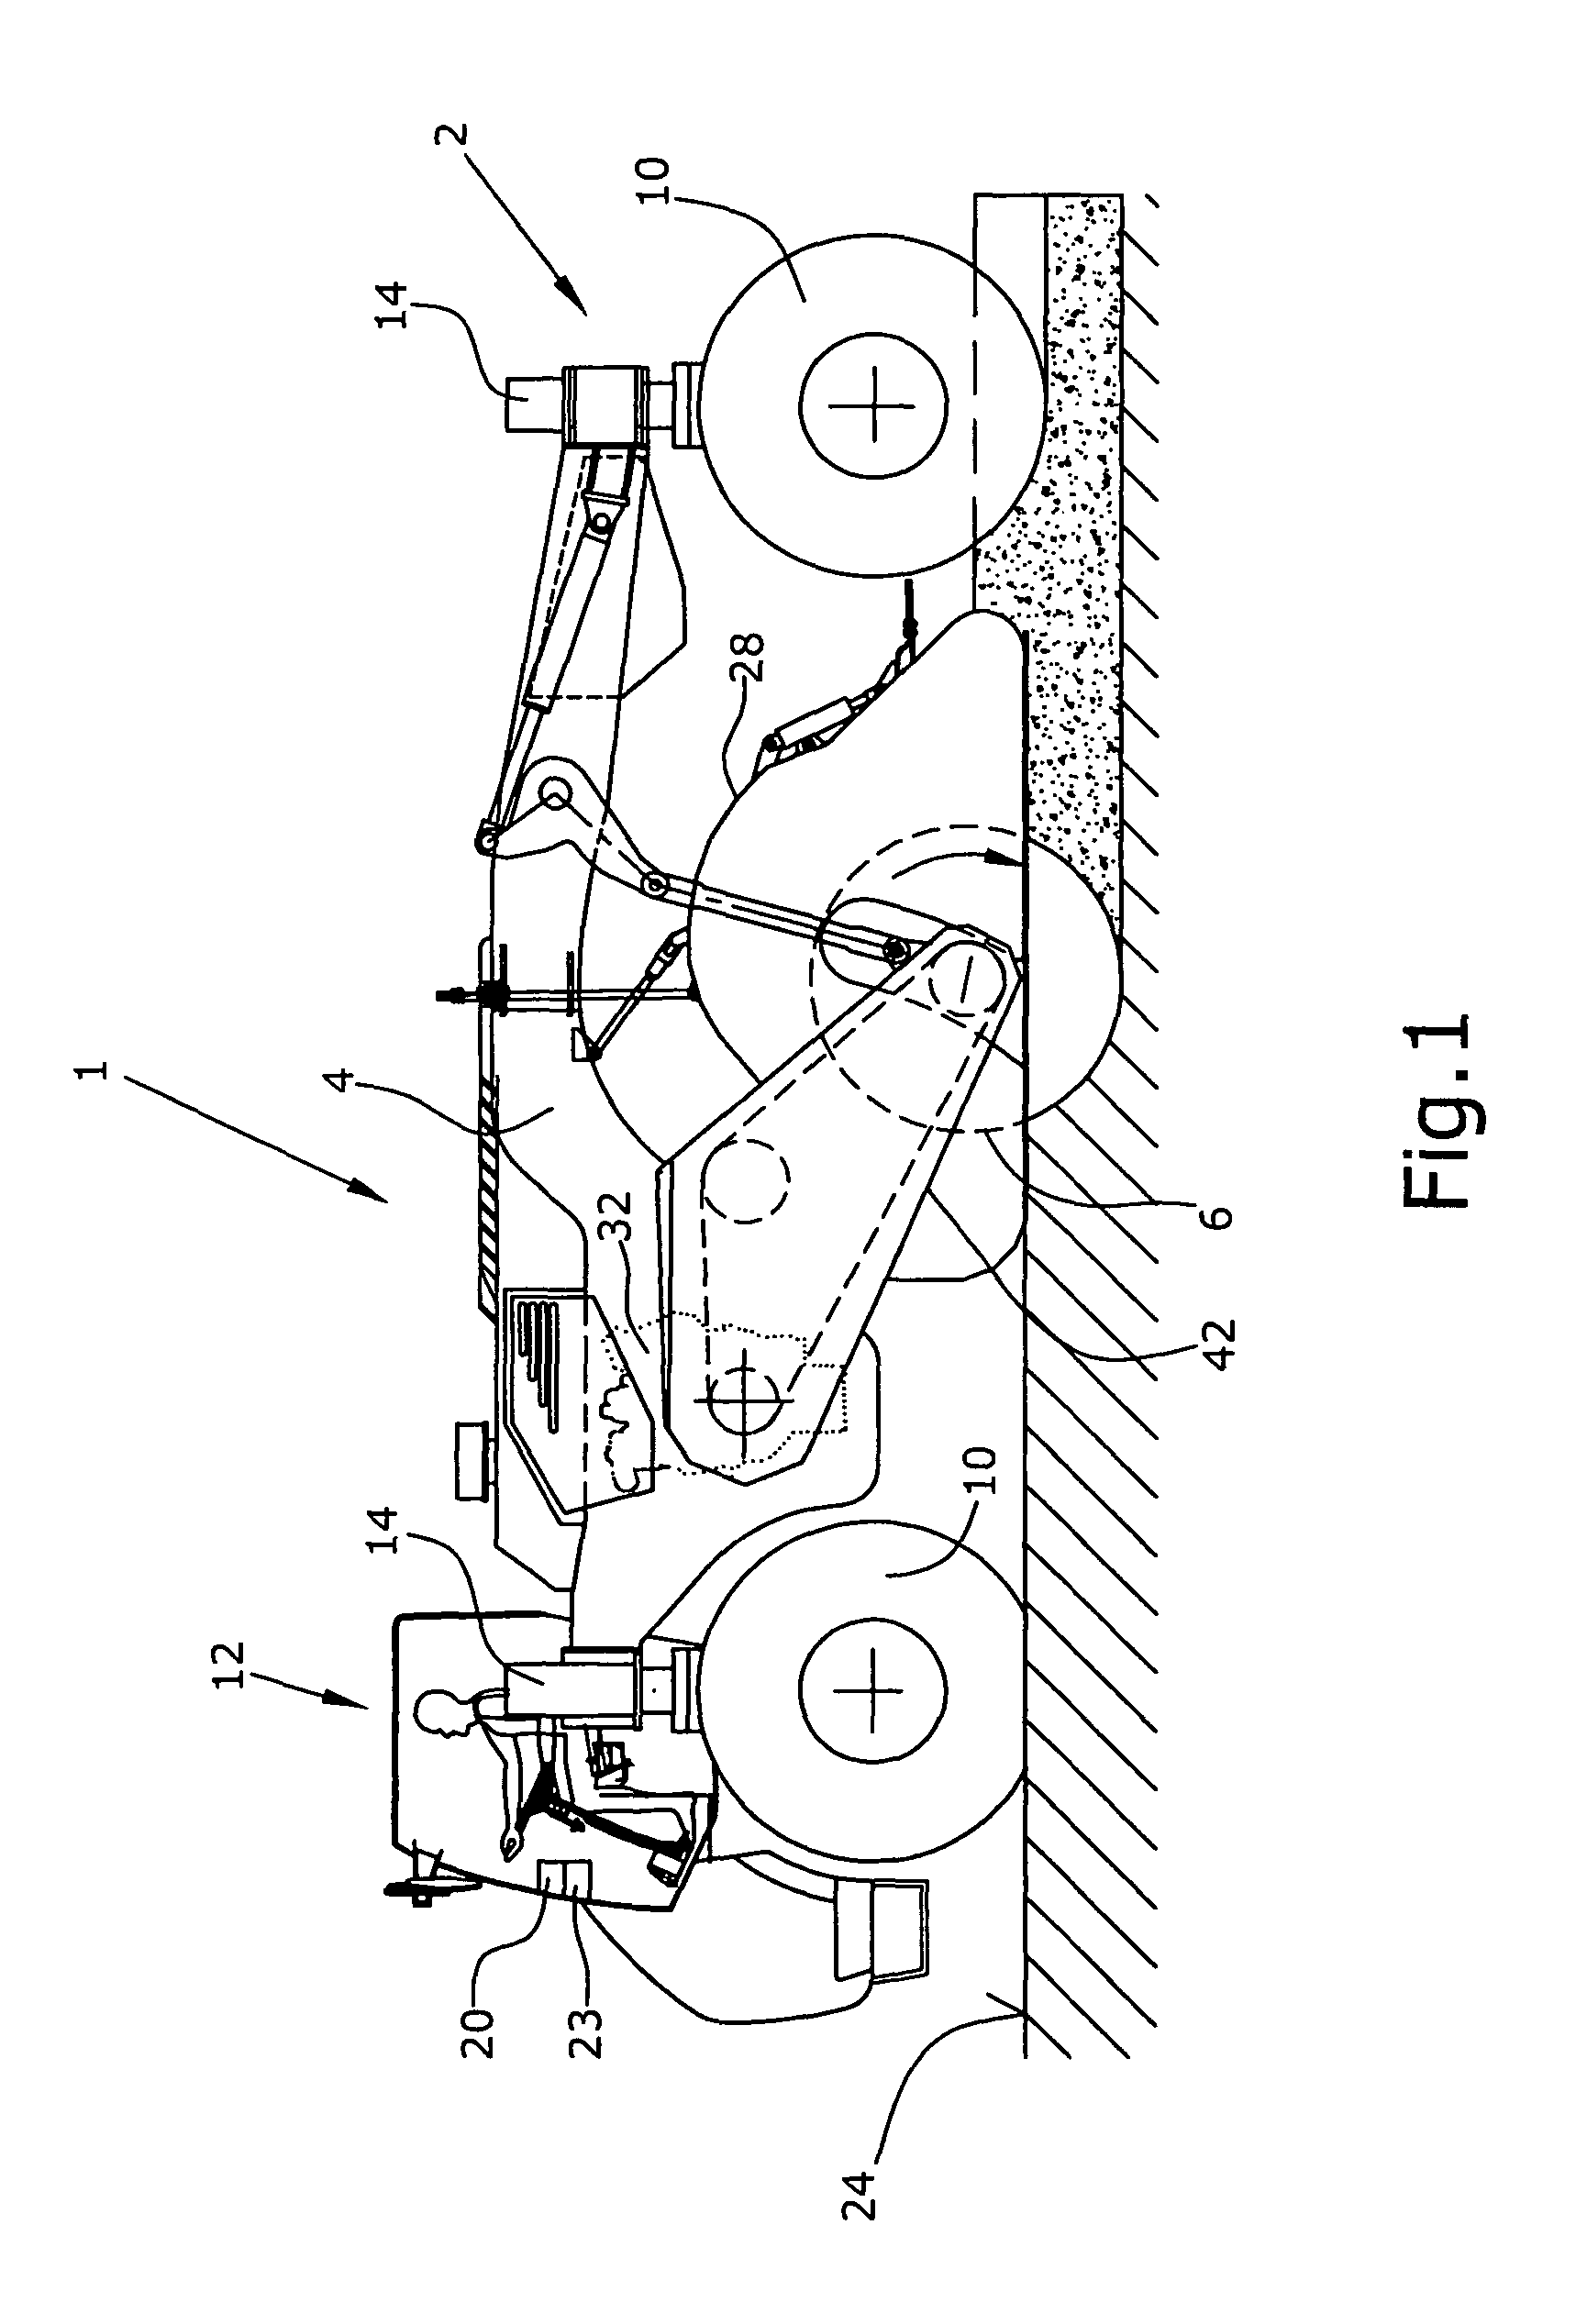 Automotive construction engine and lifting column for a contruction engine